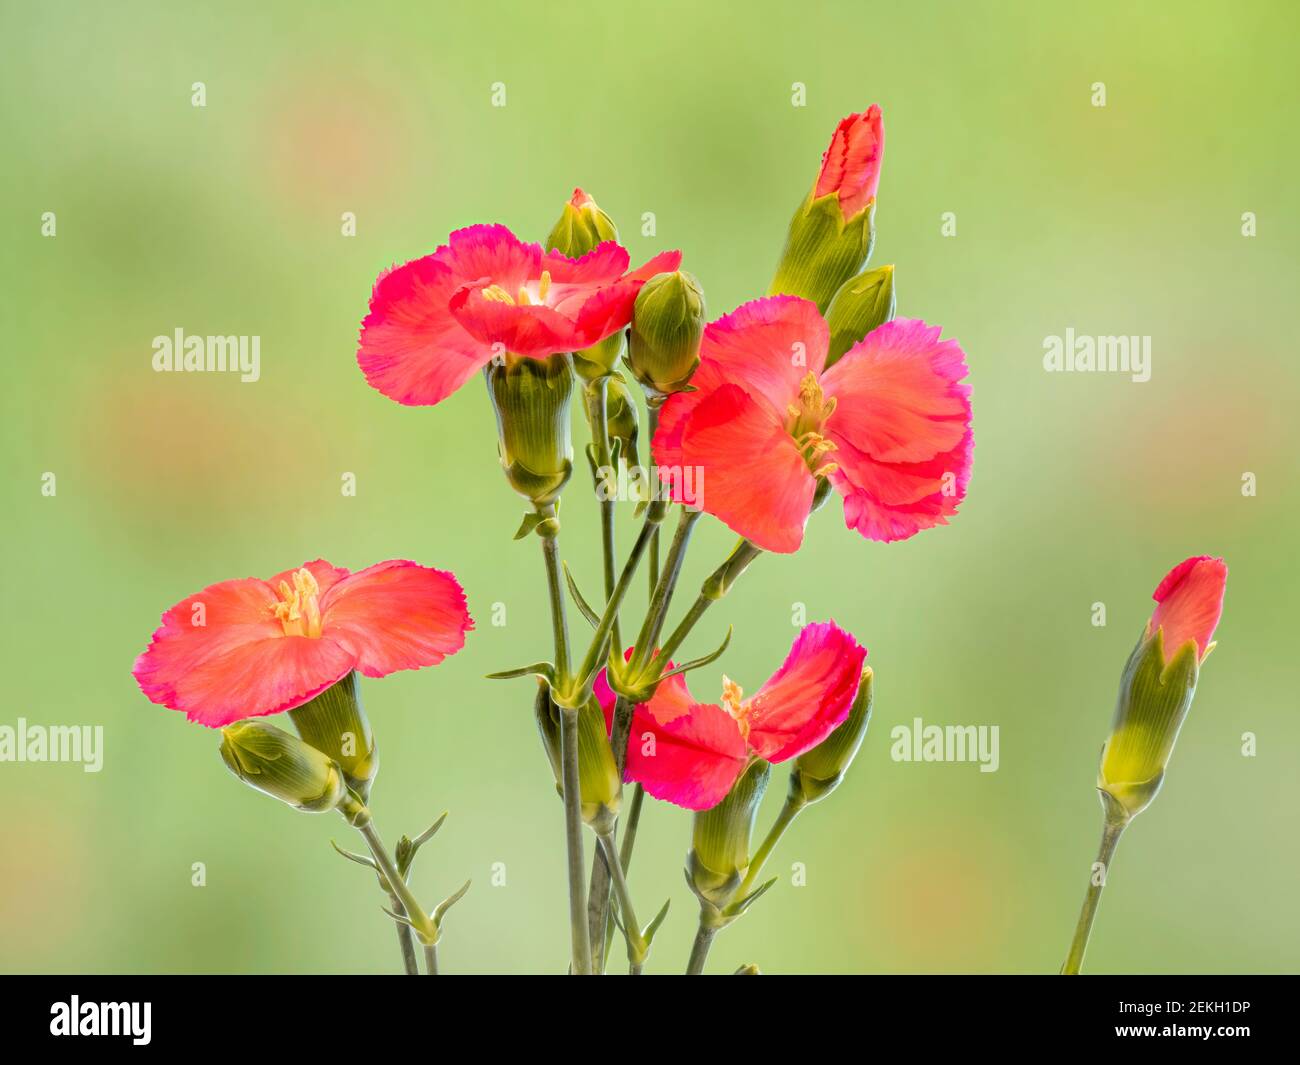 Red carnation flowers against green background Stock Photo